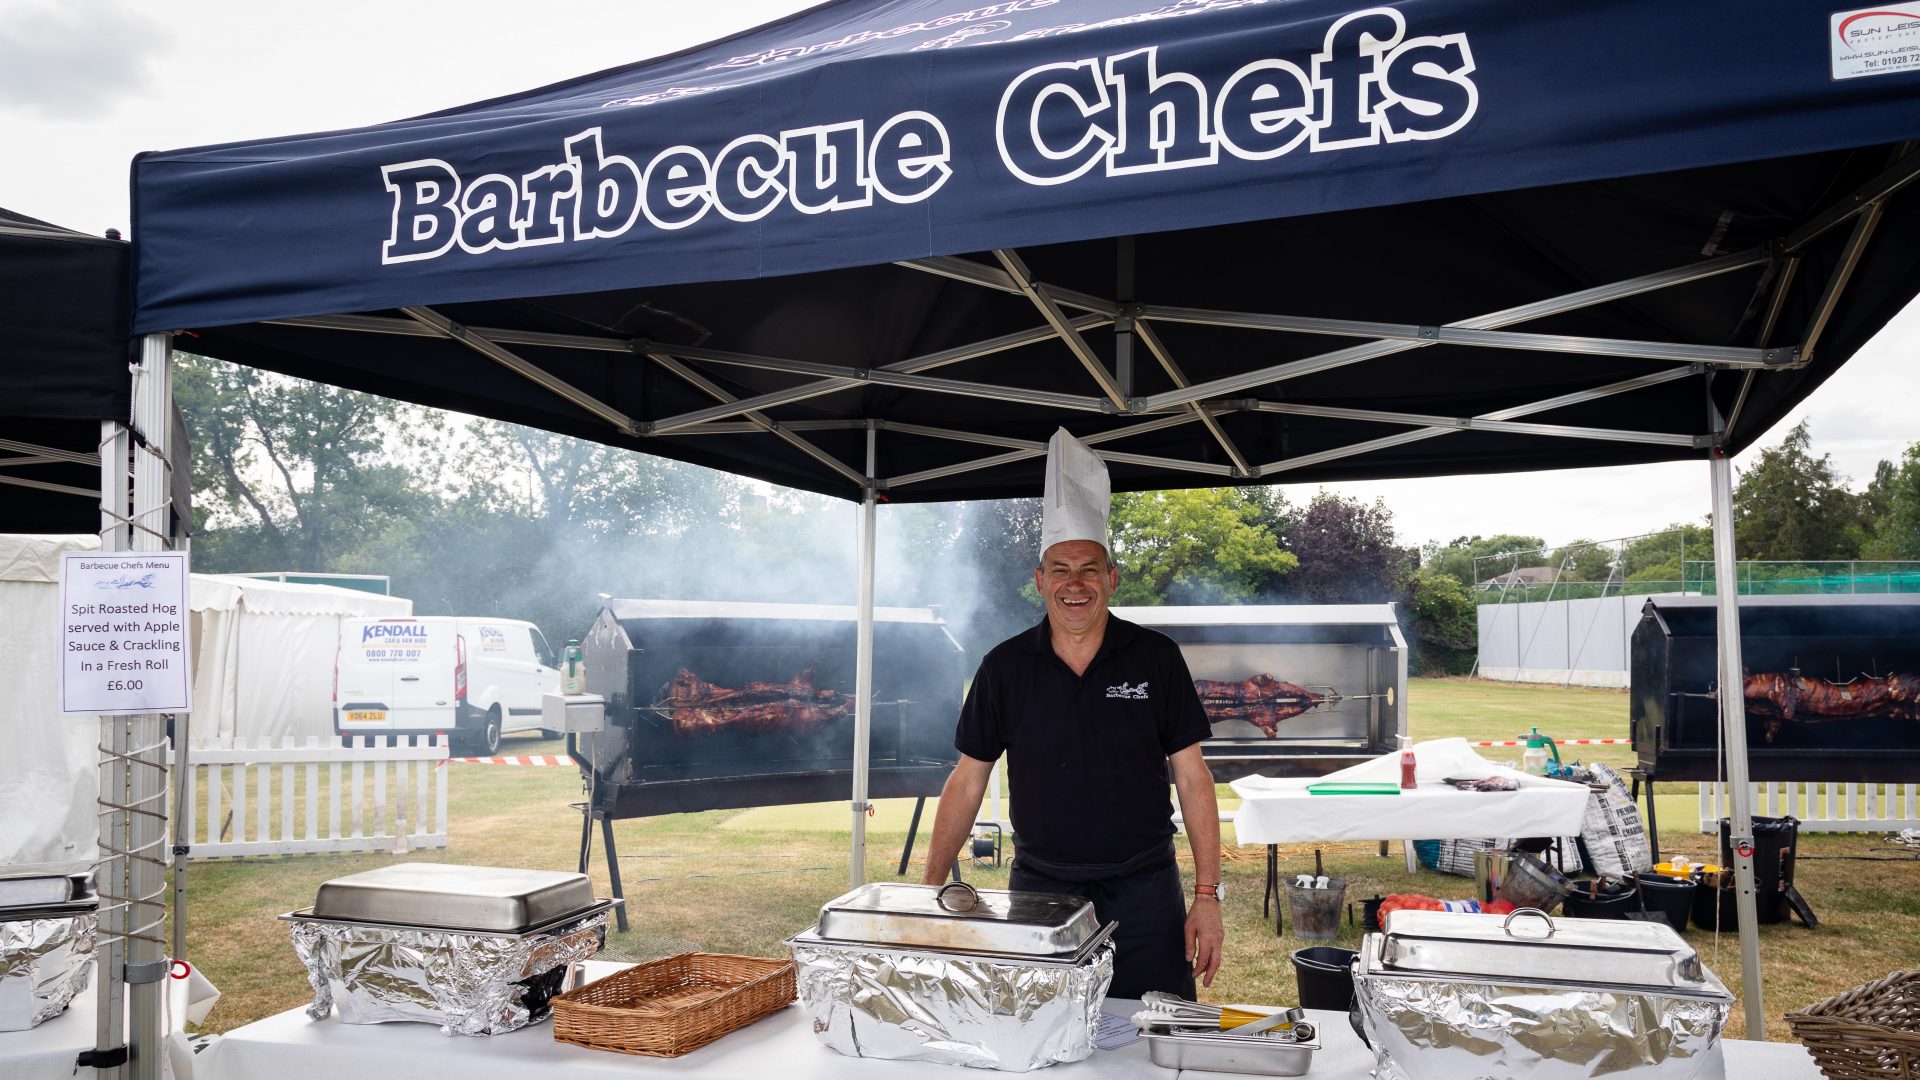 Barbecue Chefs Catering